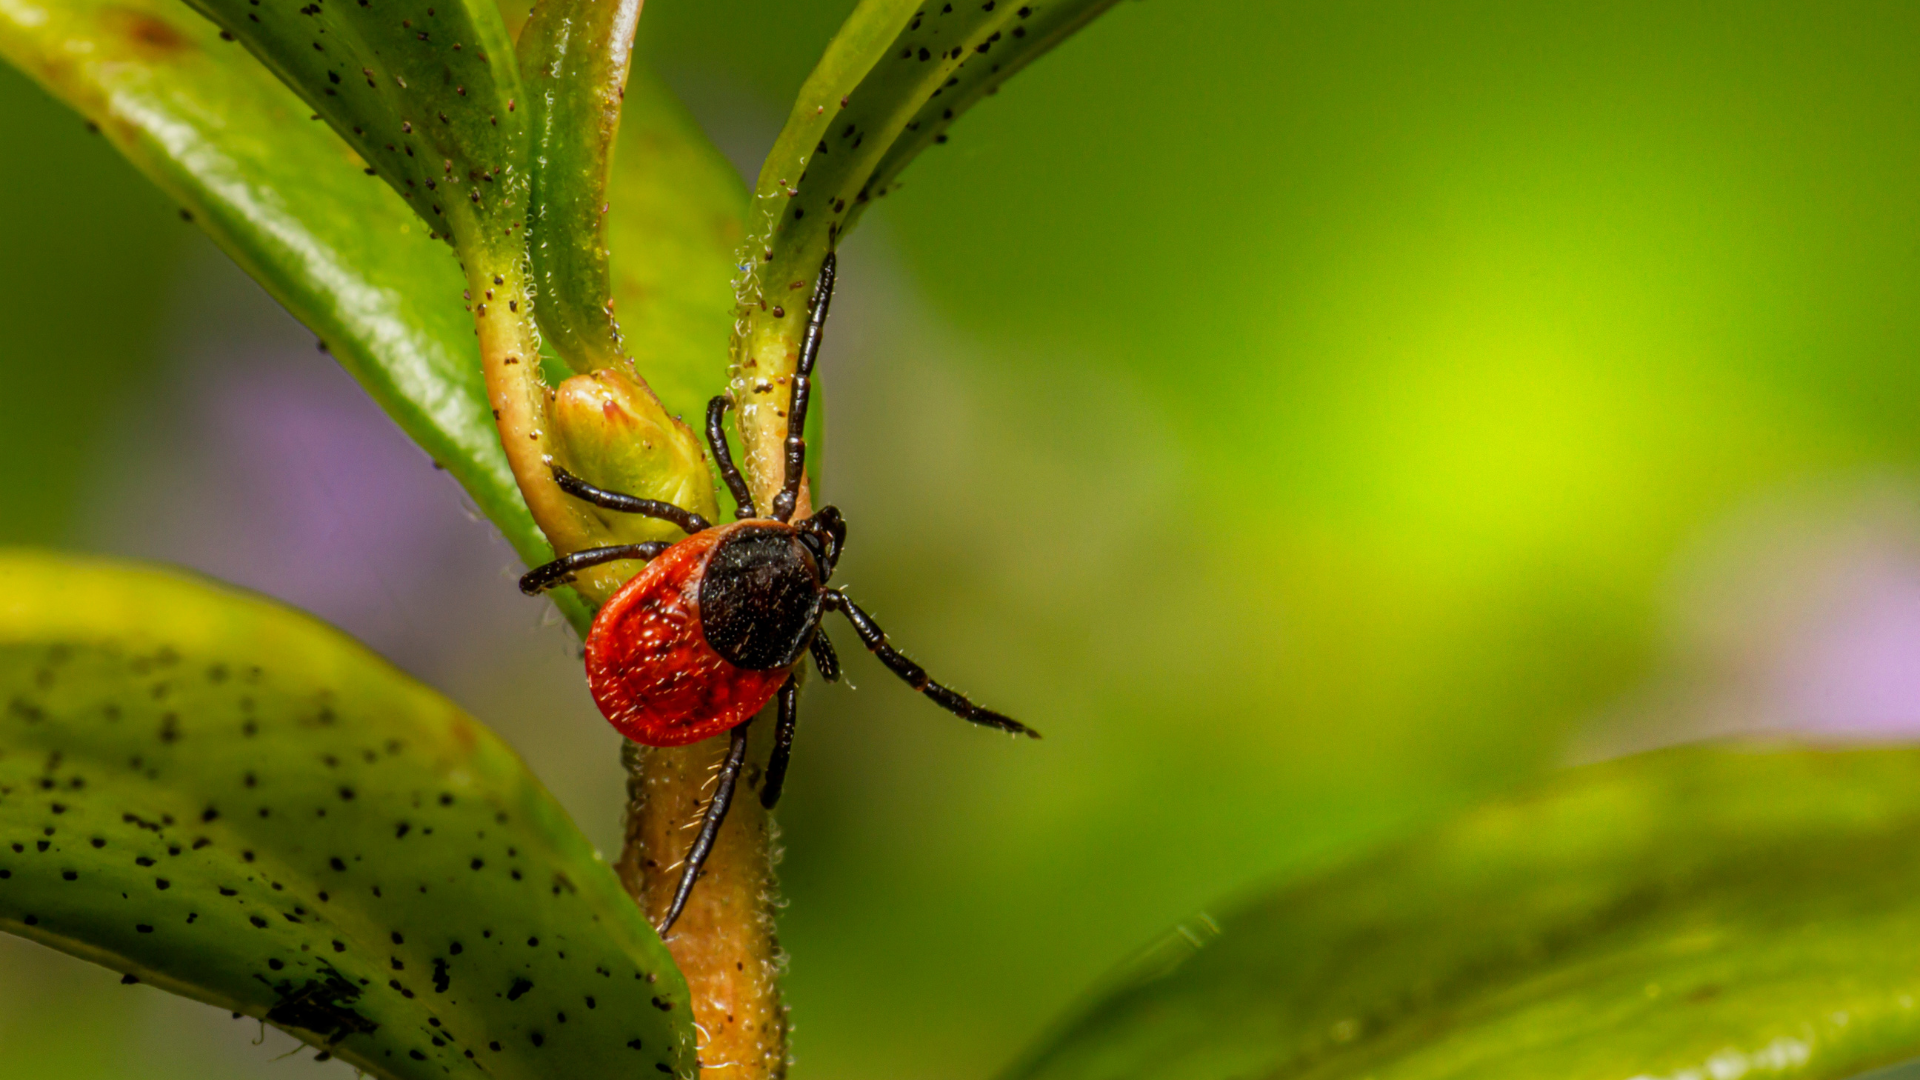 Close-up of a black-legged tick on a green plant, representing the primary vector for Lyme disease.